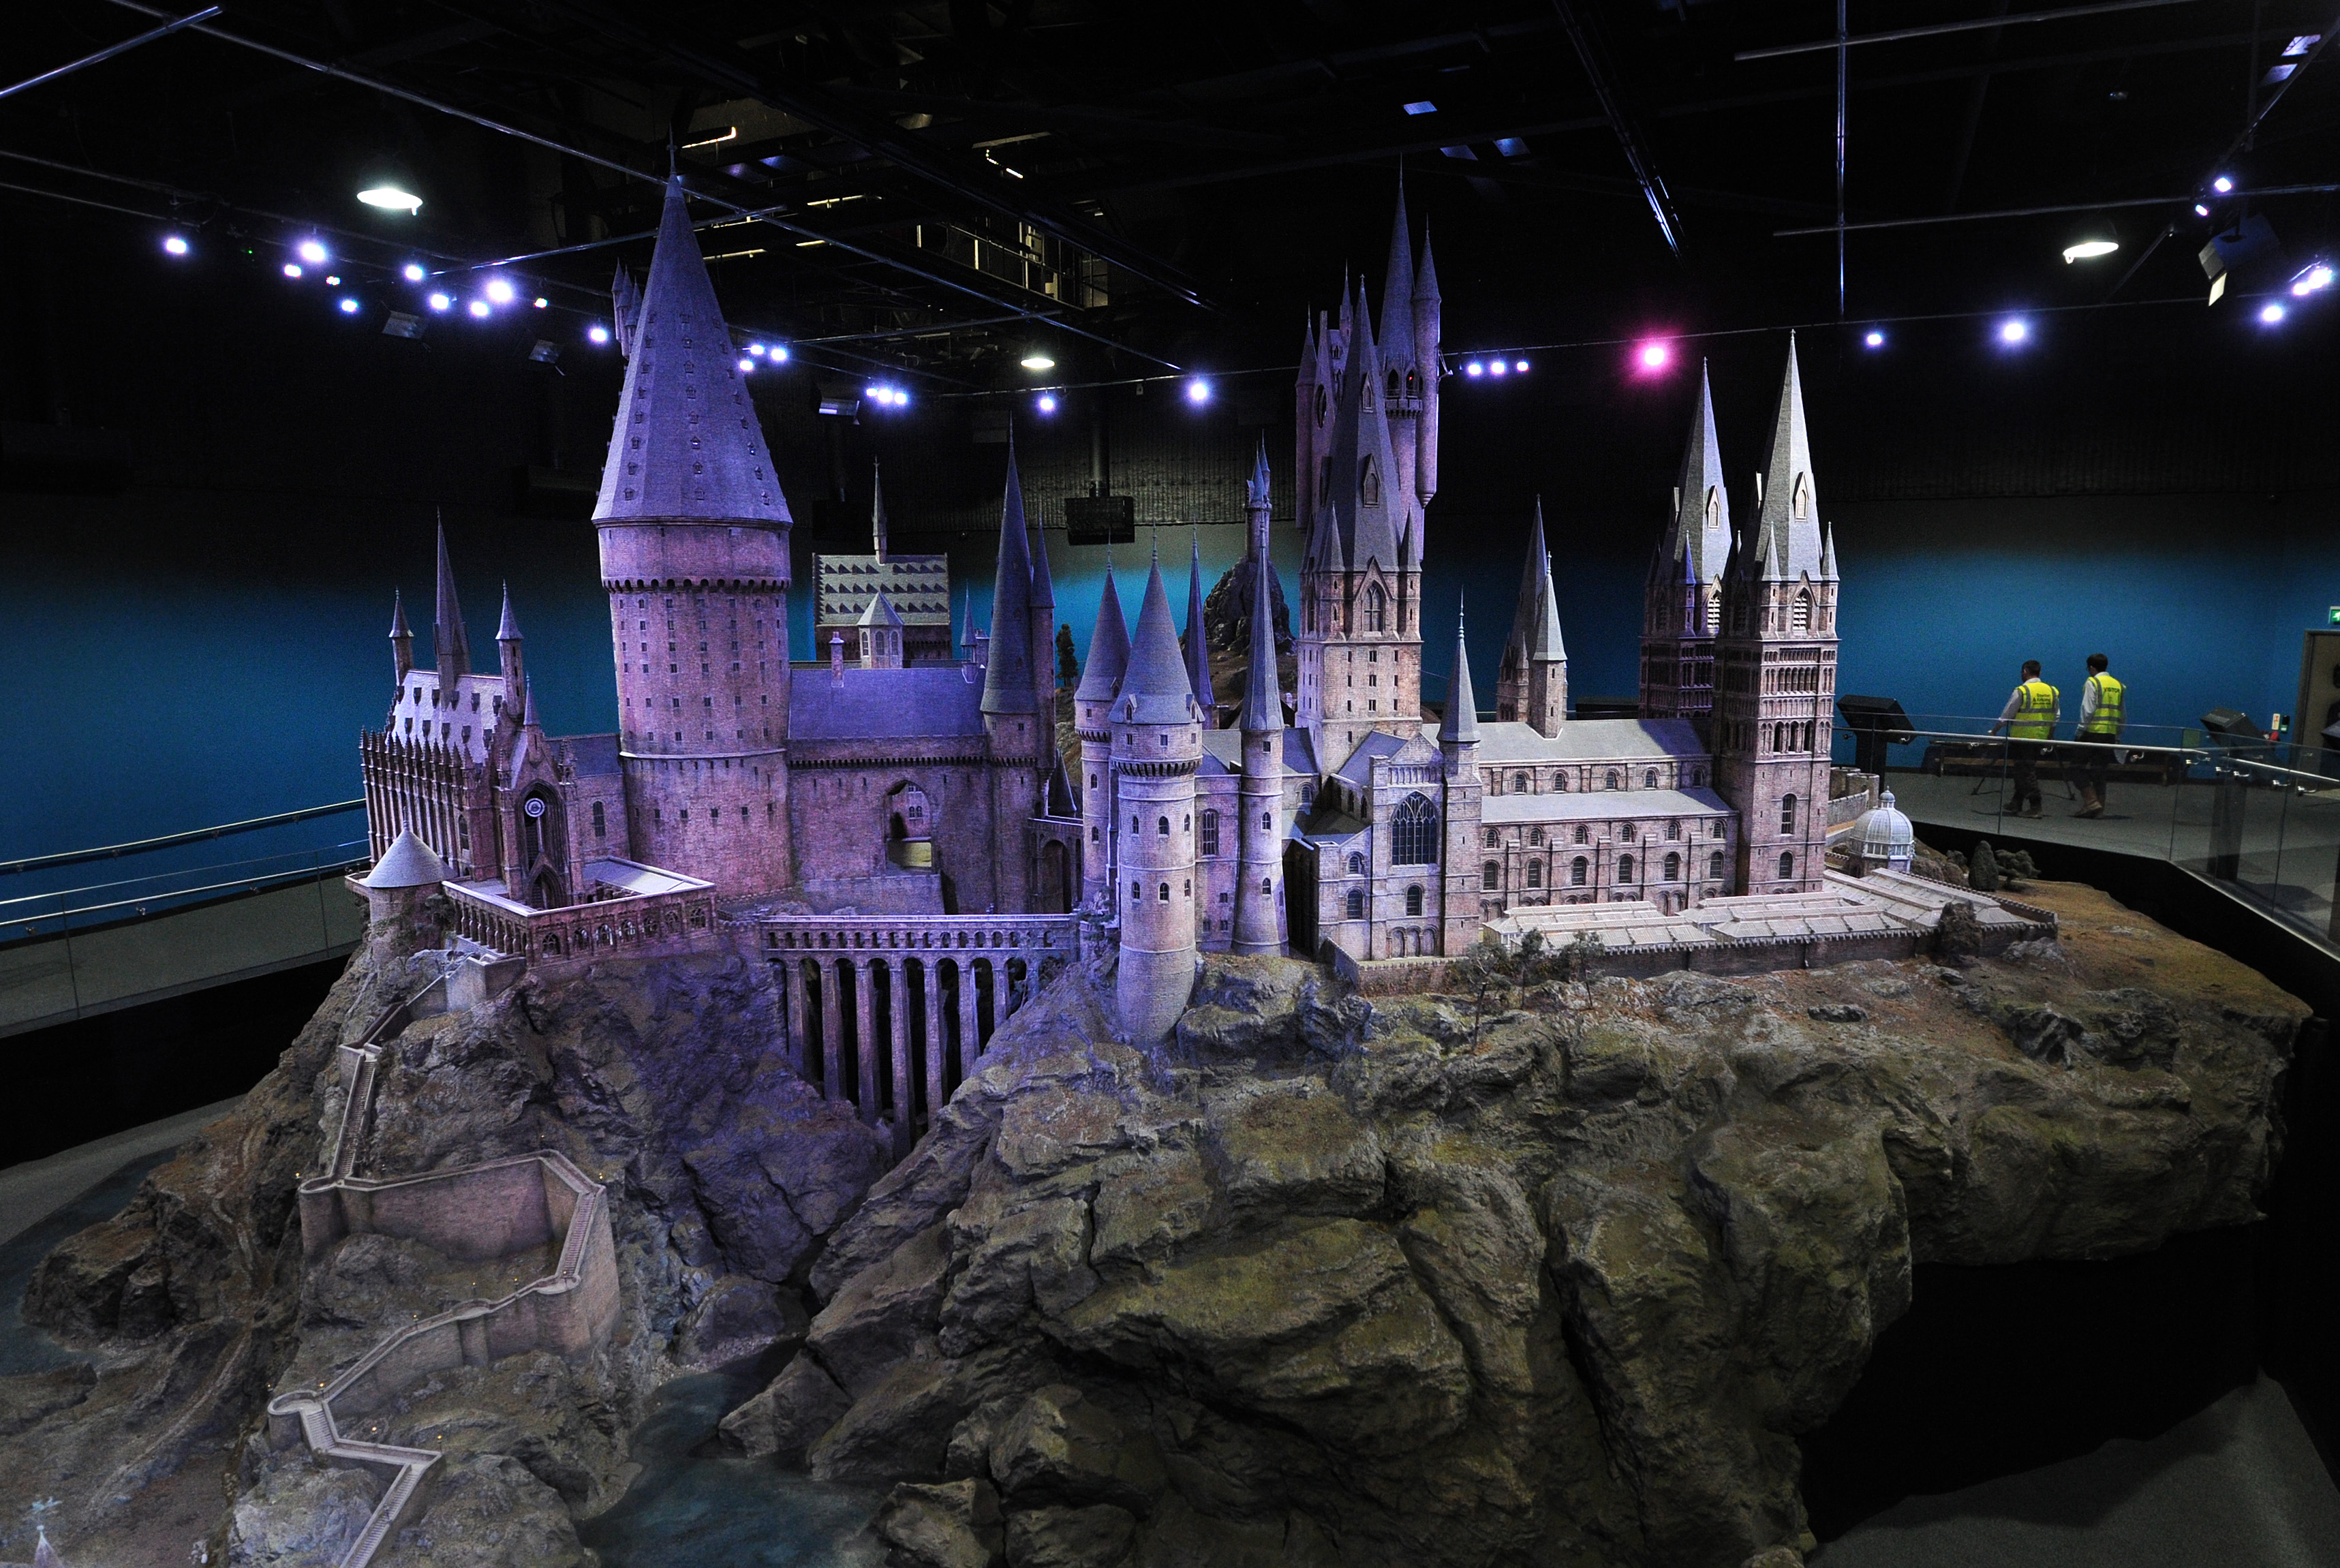 A general view shows a scale model of Hogwarts School of Witchcraft and Wizardry during a preview of the Warner Bros Harry Potter studio tour "The Making of Harry Potter" in north London on March 26, 2012. (Carl Court—AFP/Getty Images)